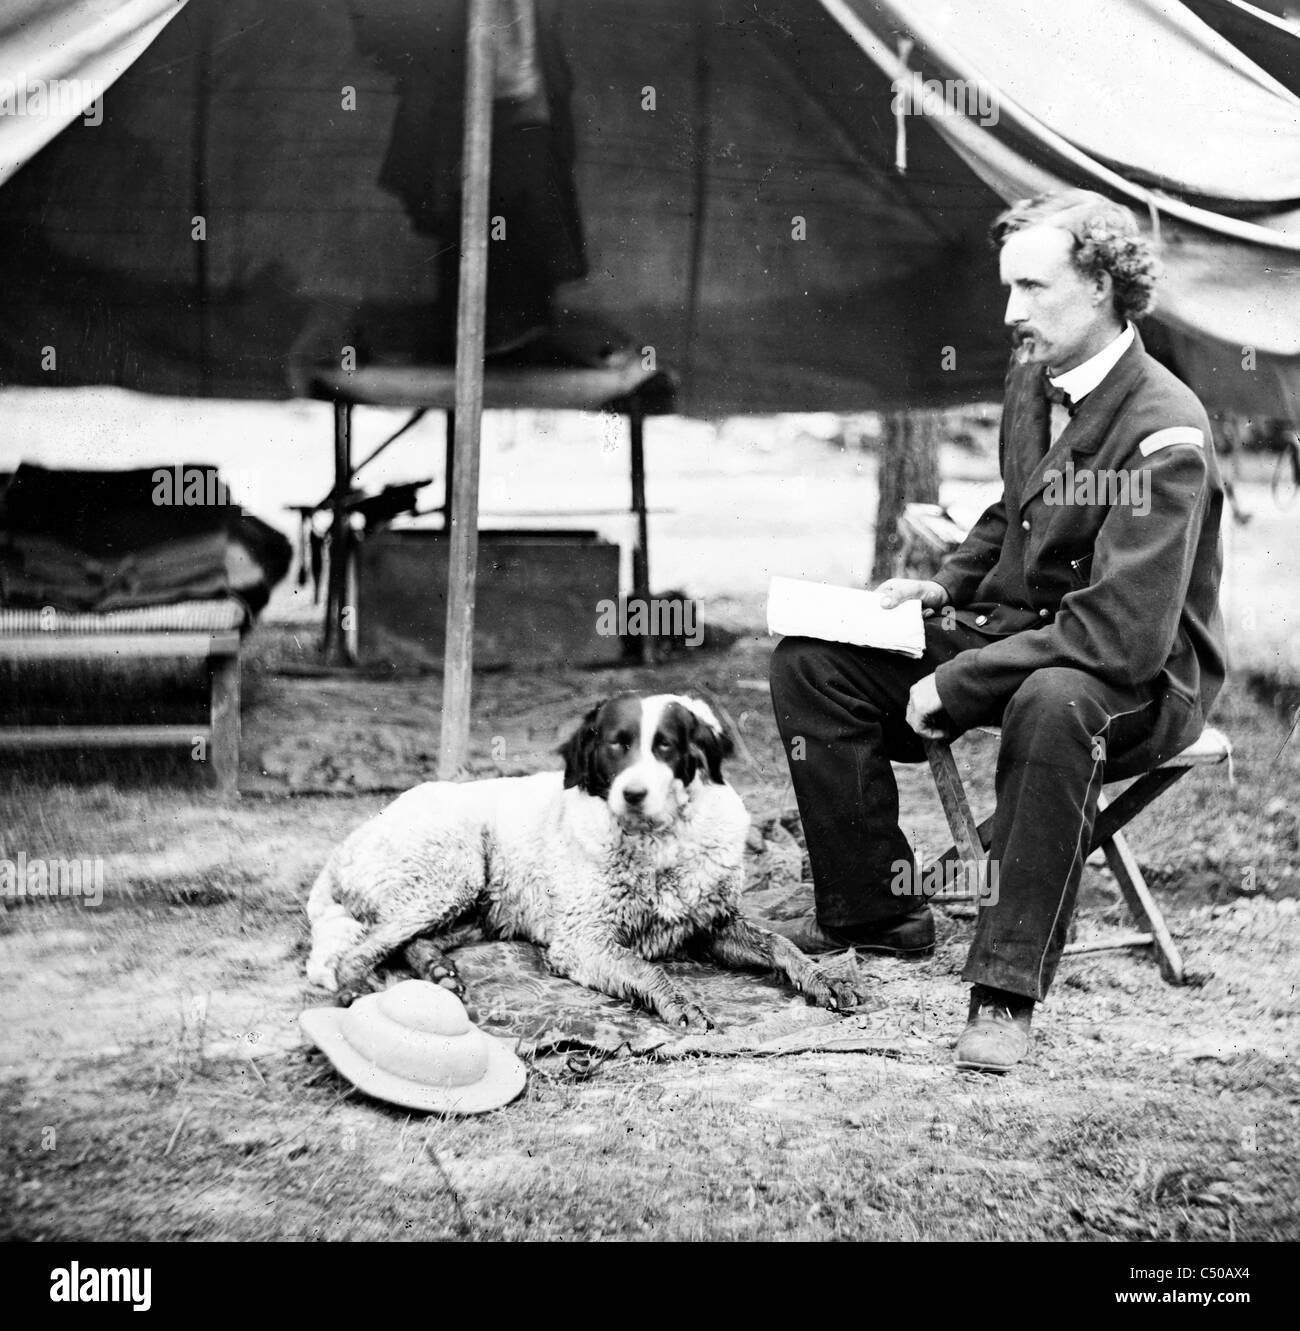 General Custer, George Armstrong Custer als Oberleutnant und sein Hund Stockfoto